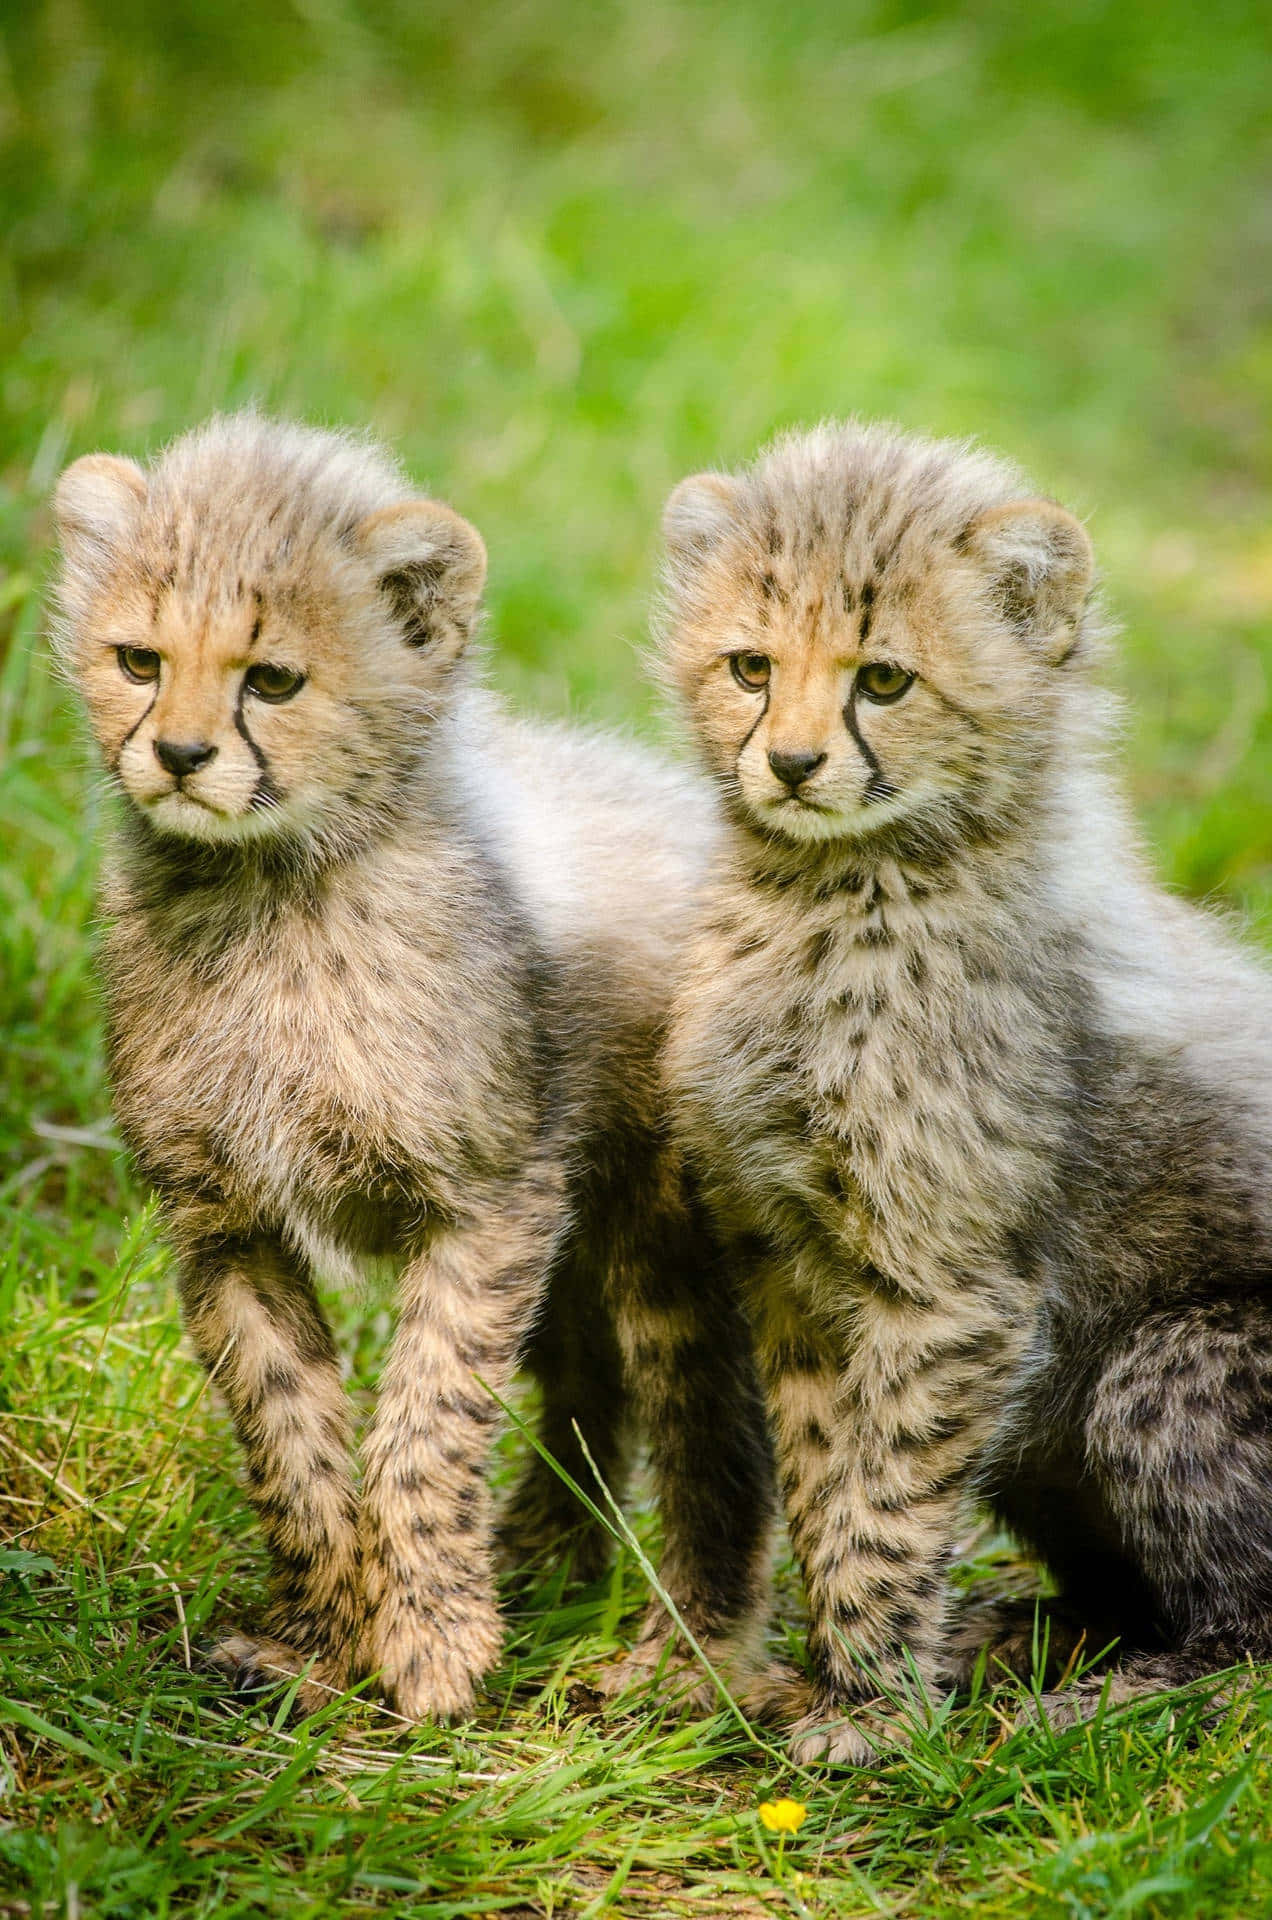 Two Cheetah Cubs Are Sitting On The Grass Wallpaper